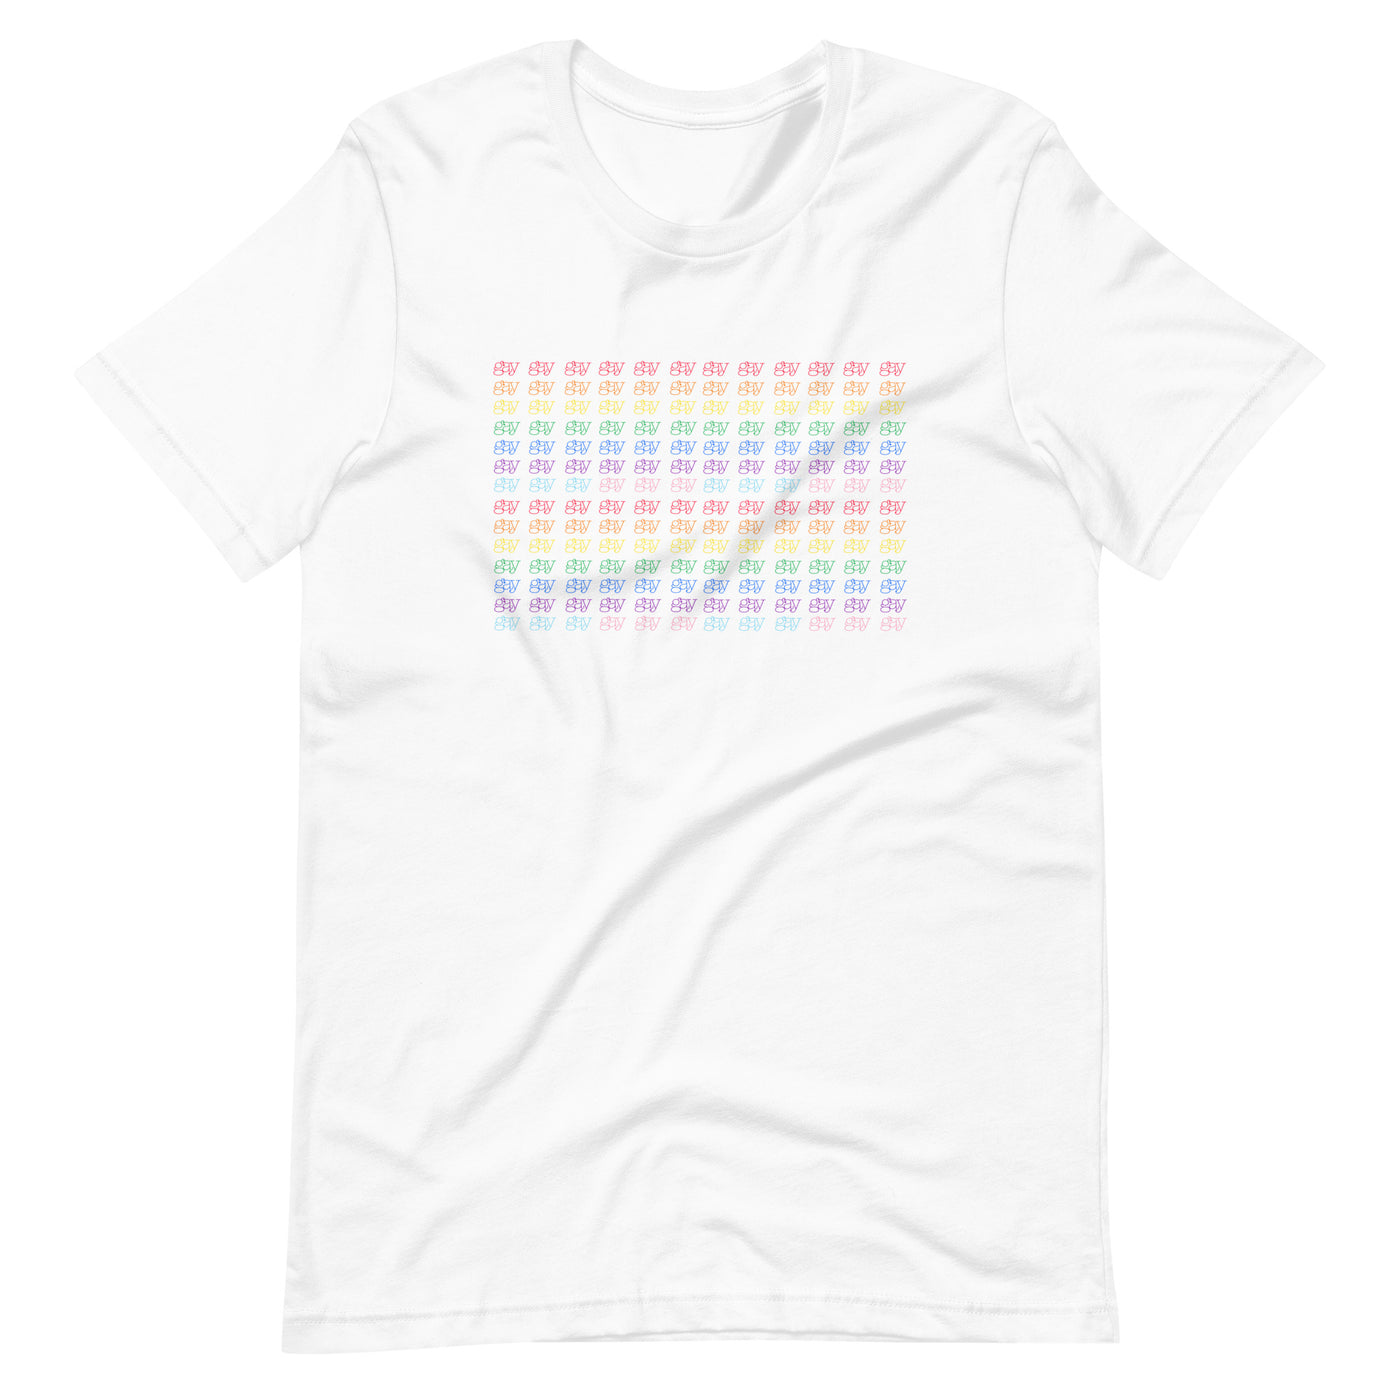 Pride Clothes - Remarkably Unique Typewriter Font Gay Pride T-Shirt - White